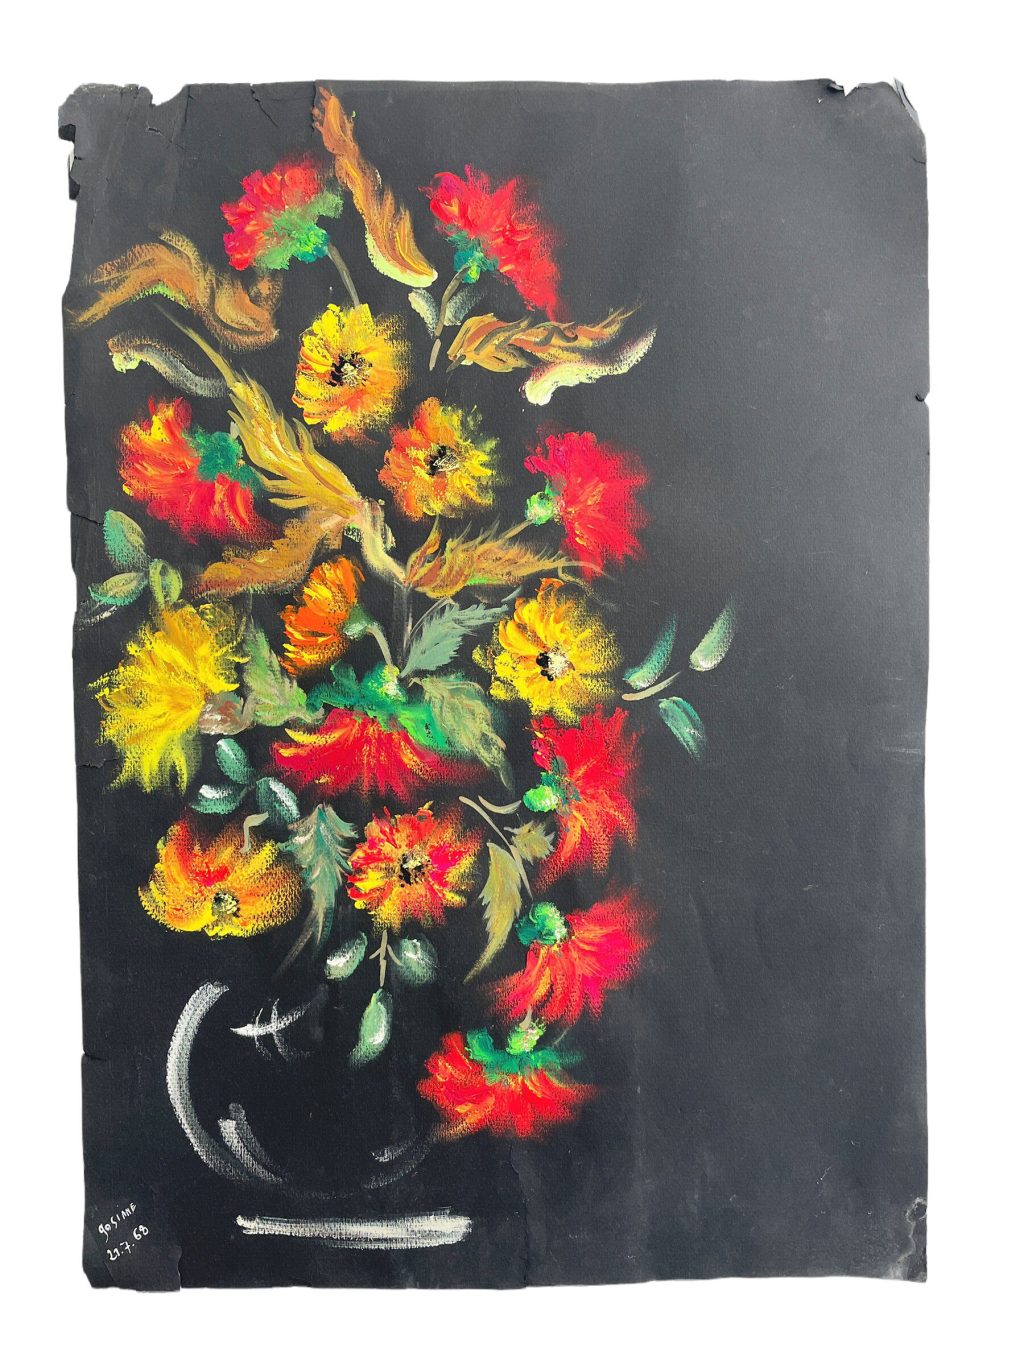 Vintage French Acrylic Painting Of Flowers On Black Paper Naive Style Wall Decor Signed Josiane Pasquier c1968 / EVE